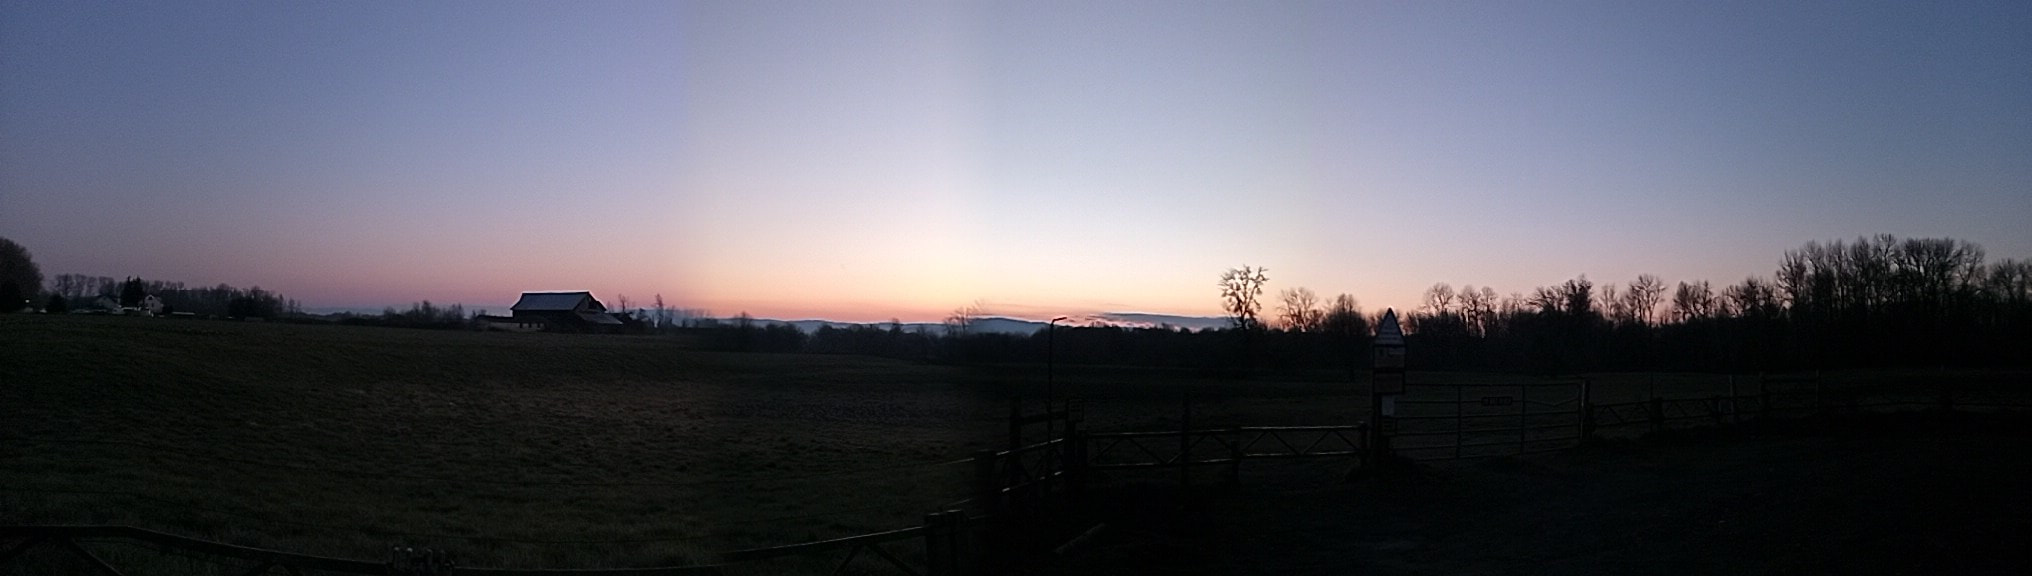 Panorama of the Sunset Silhouette over the farm on Sauvie Island, February 2022